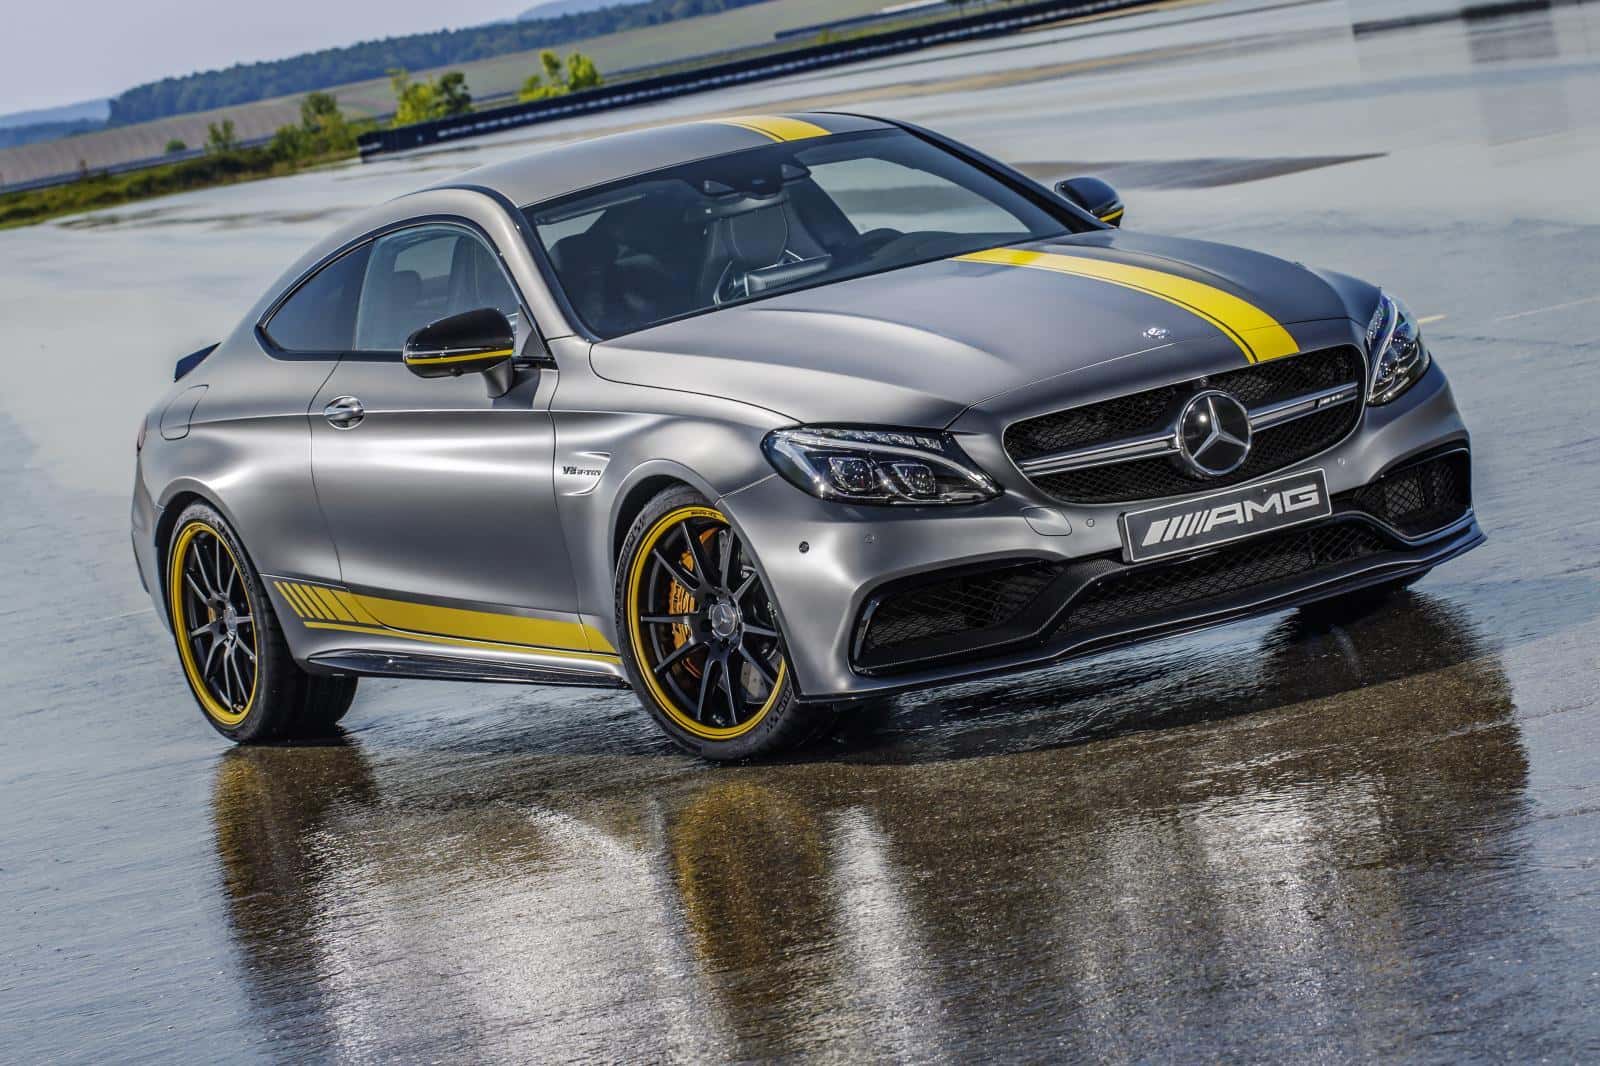 Mercedes-AMG-C63-Coupe-Edition-1-8